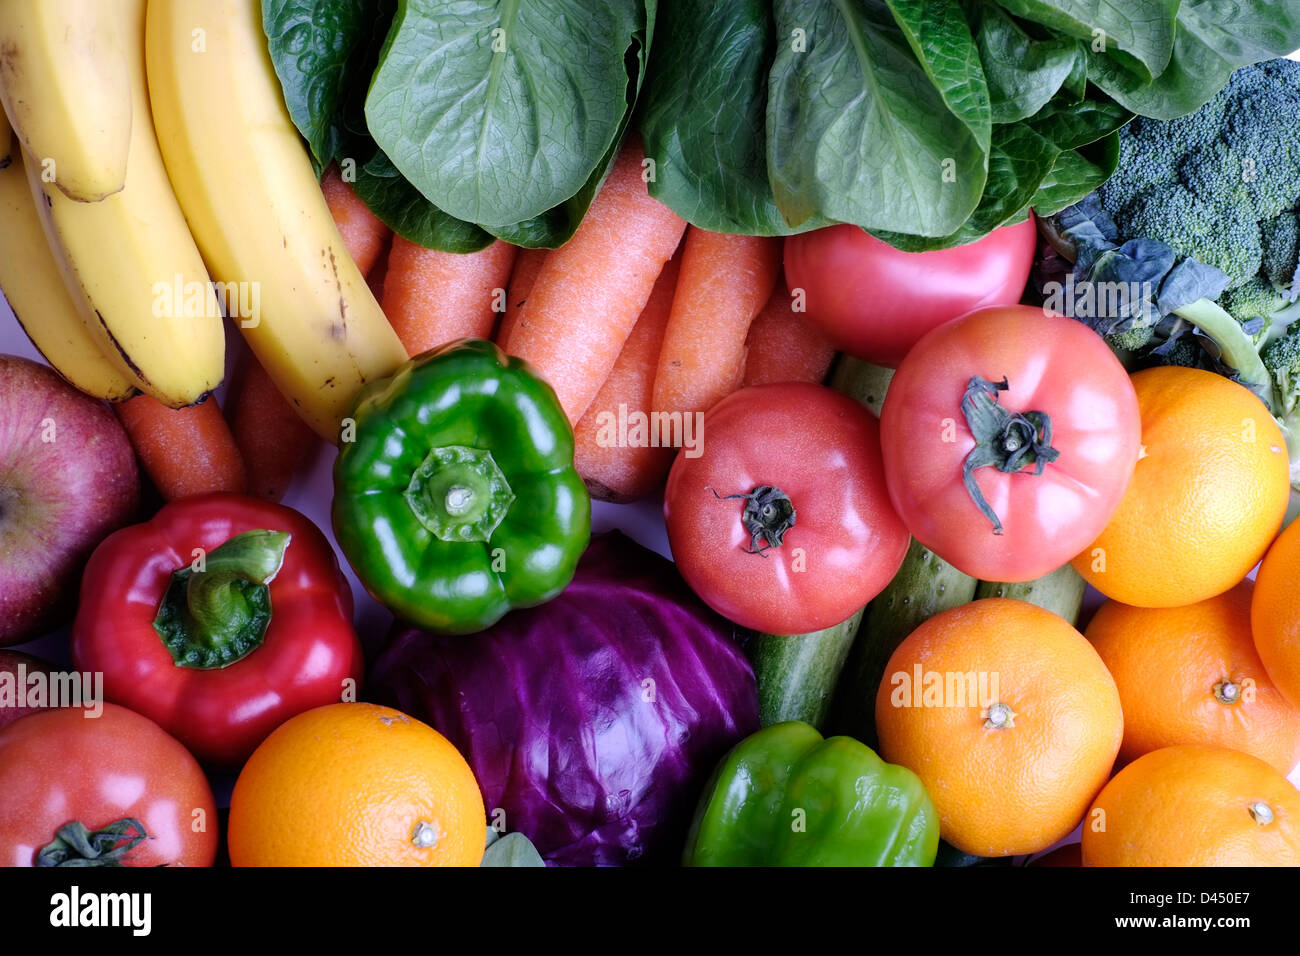 Fresh vegetables and fruits Stock Photo